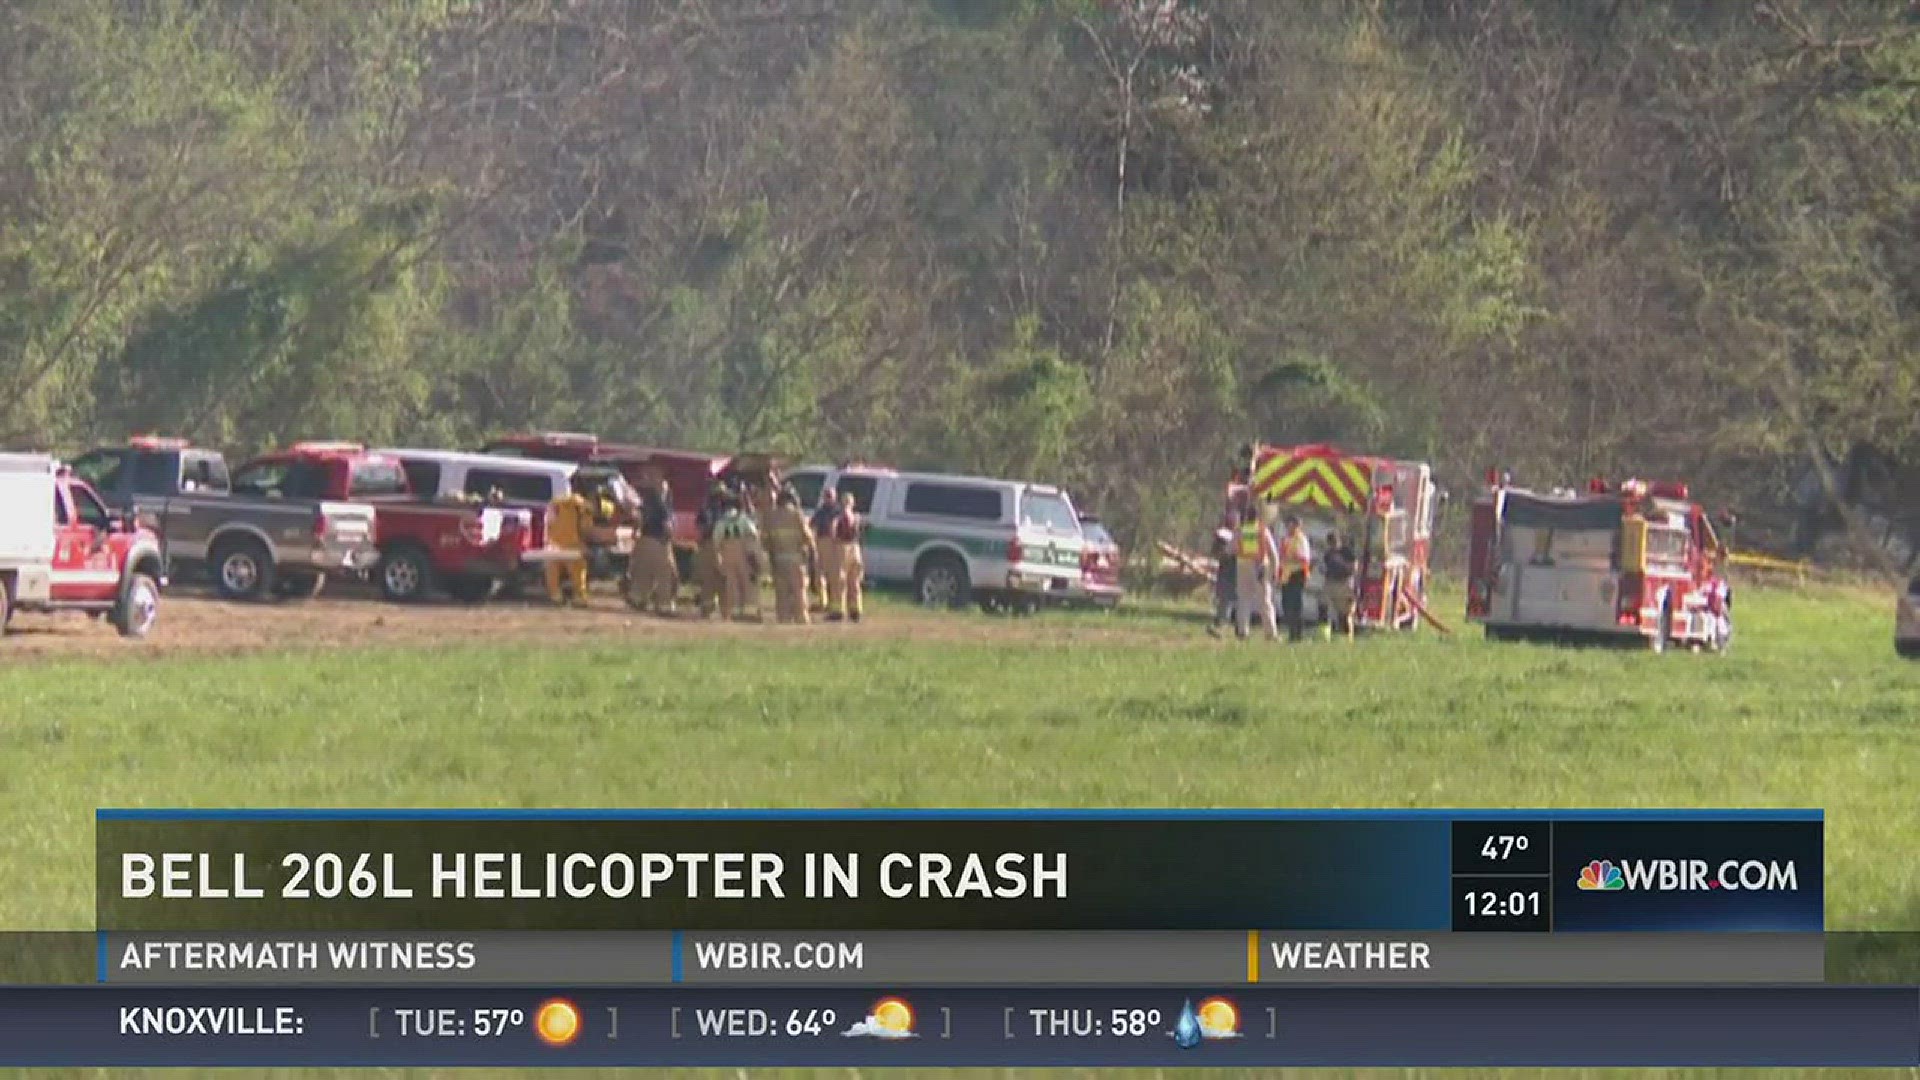 The FAA and NTSB are investigating a helicopter crash in Pigeon Forge that killed five people.